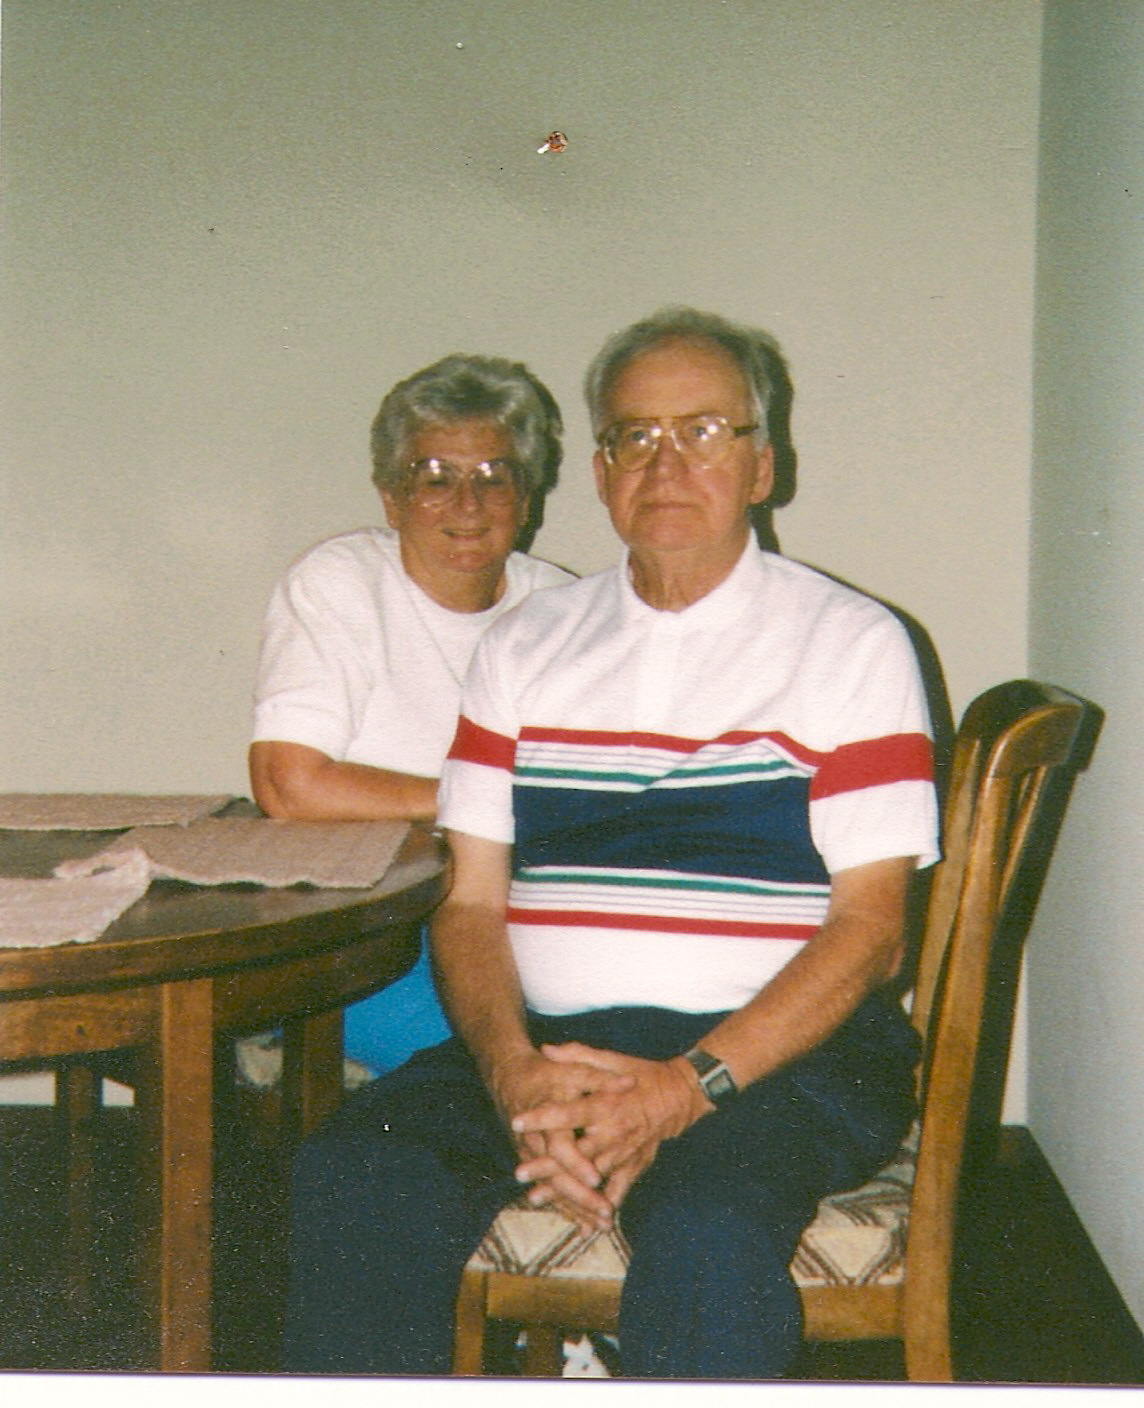 Mom and Dad.... Margery and George - Together again. Photo: August 1991. I miss you both. David..